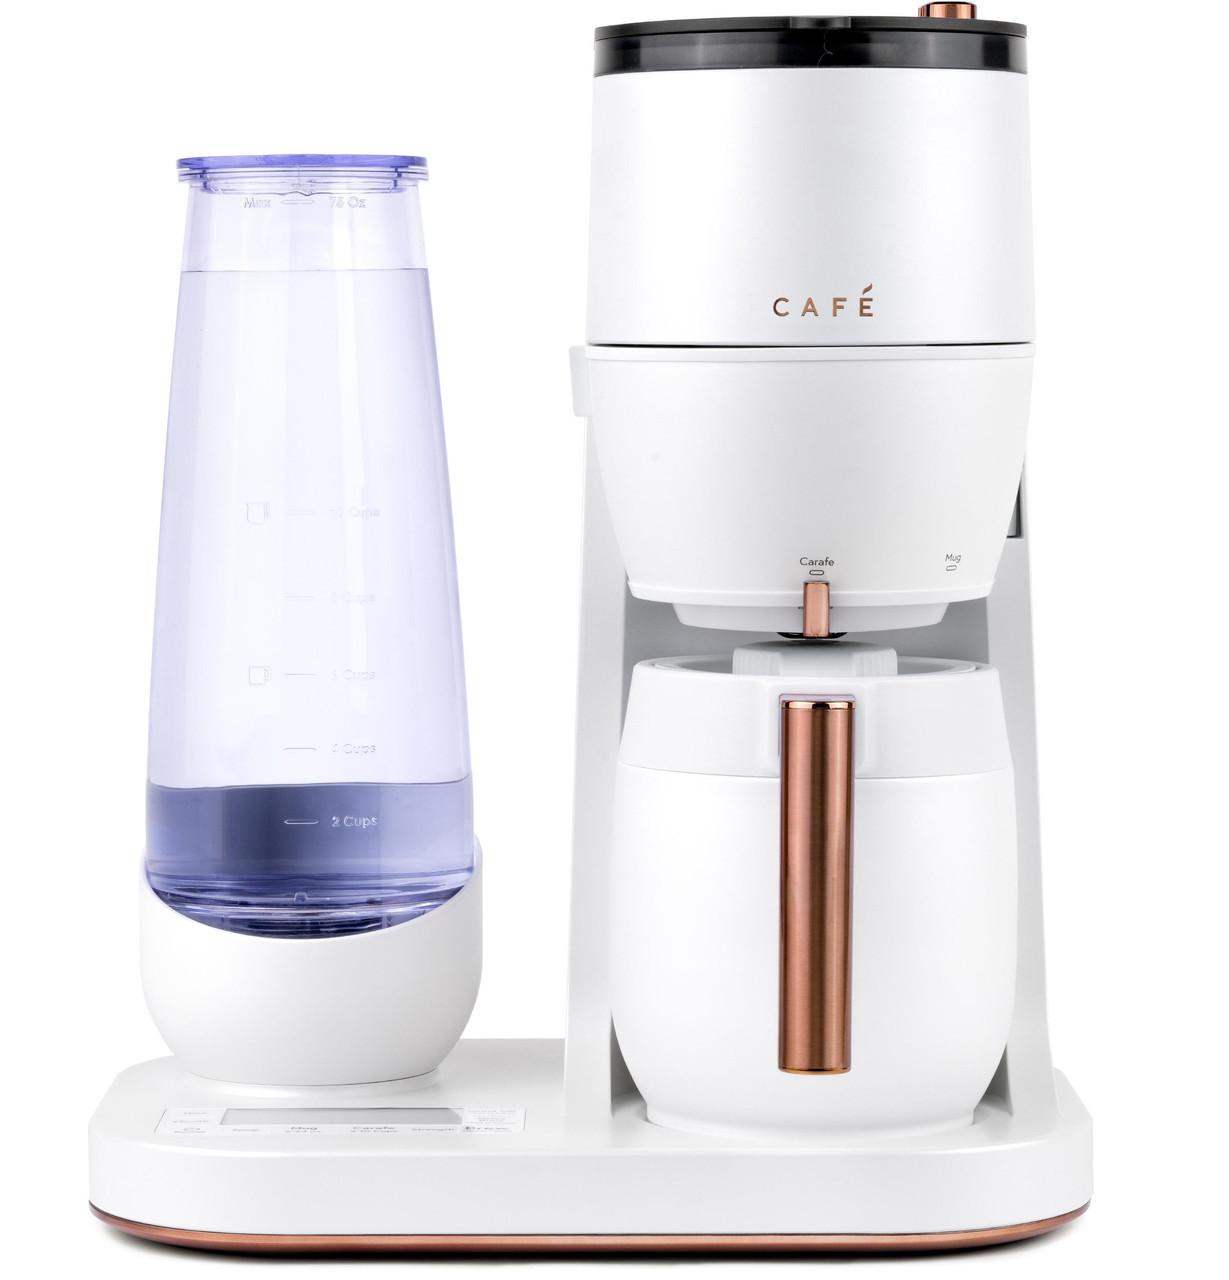 Cafe Caf(eback)™ Specialty Grind and Brew Coffee Maker with Thermal Carafe